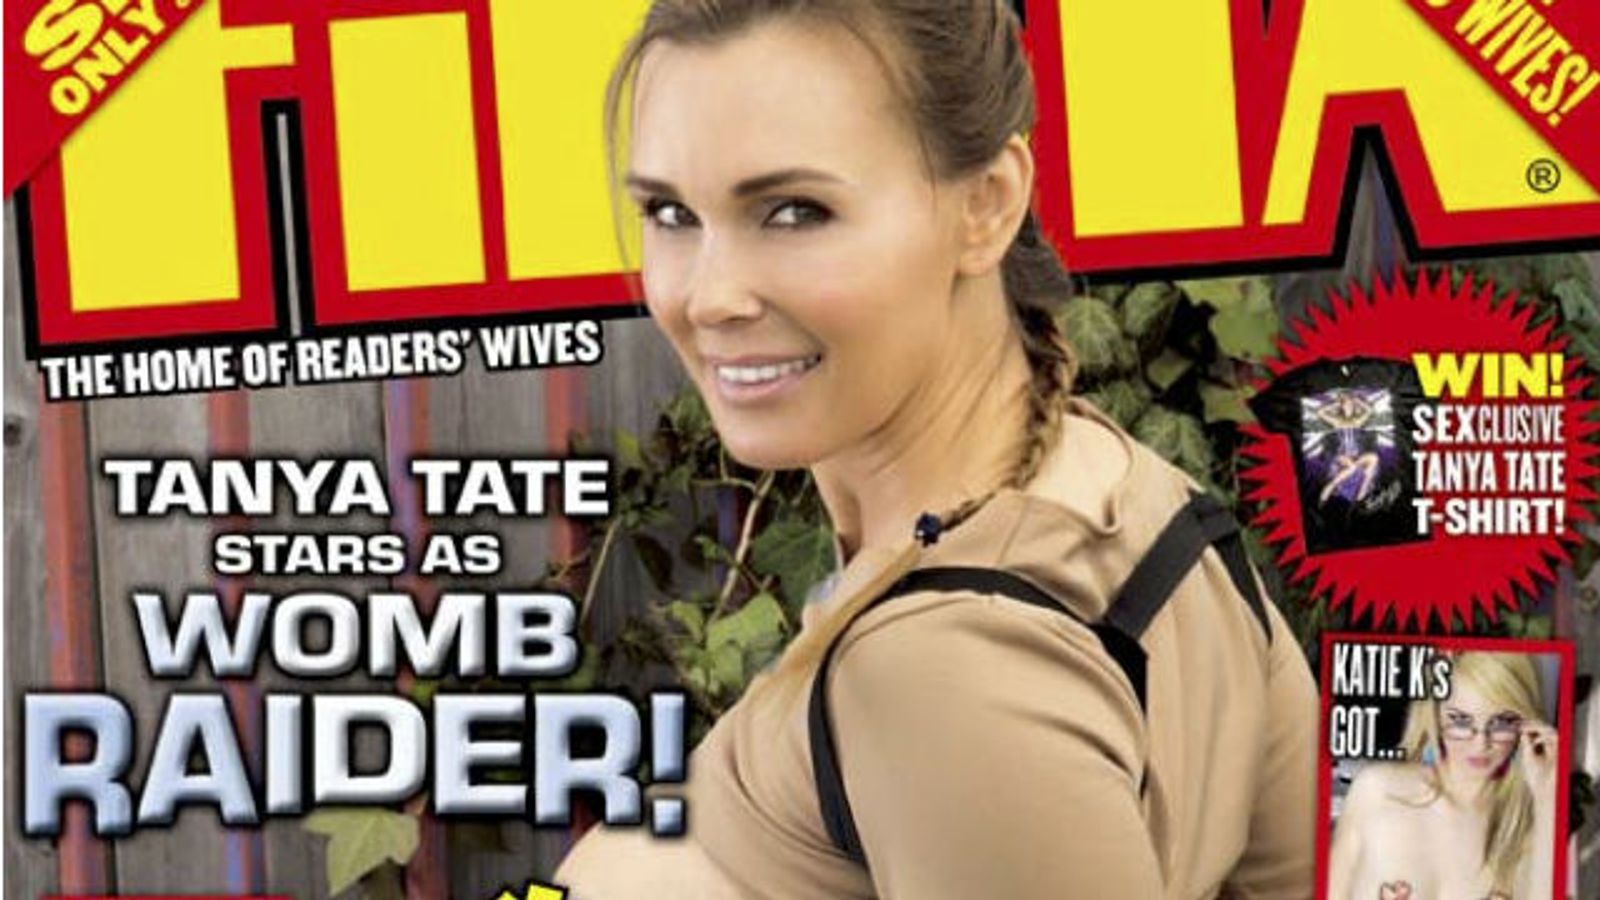 Tanya Tate Gears Up Gamer-Style for Cosplay Cover of Fiesta Magazine